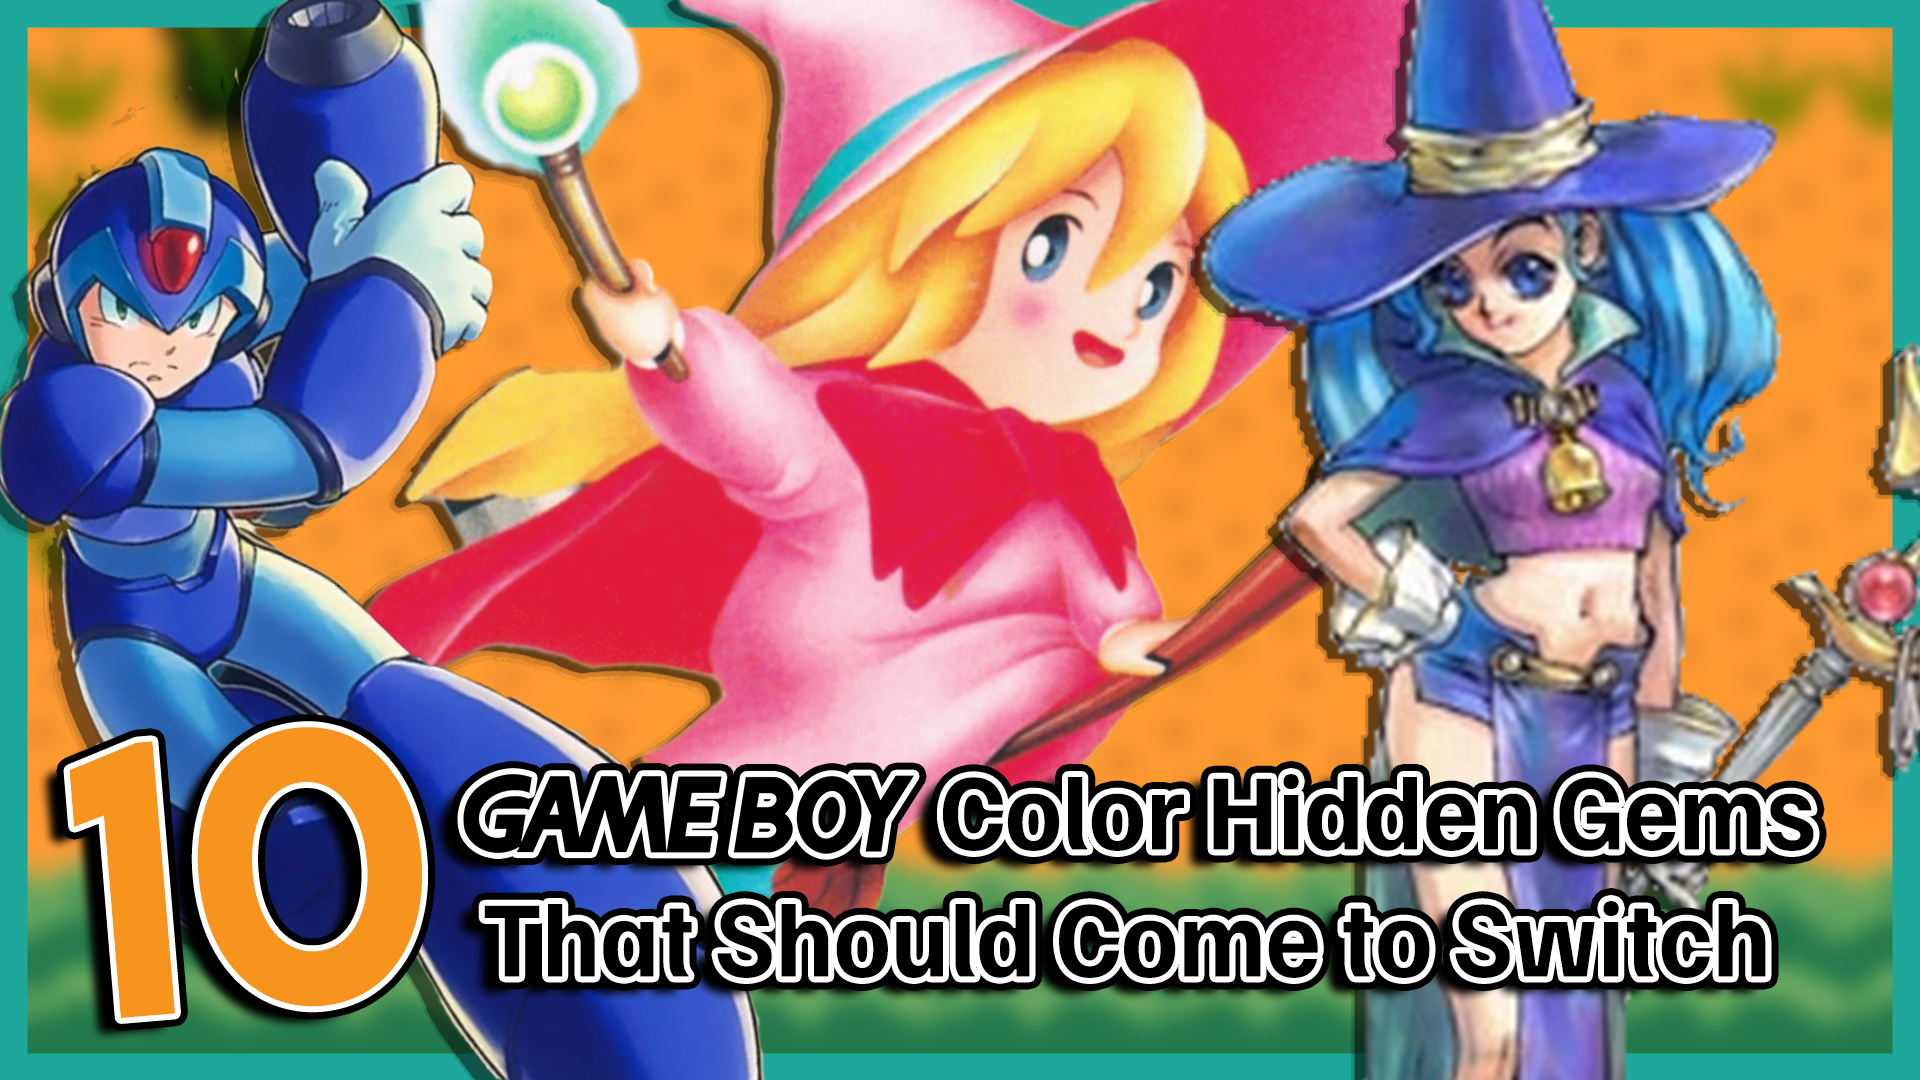 10 Game Boy Color Hidden Gems That Should Come to Switch